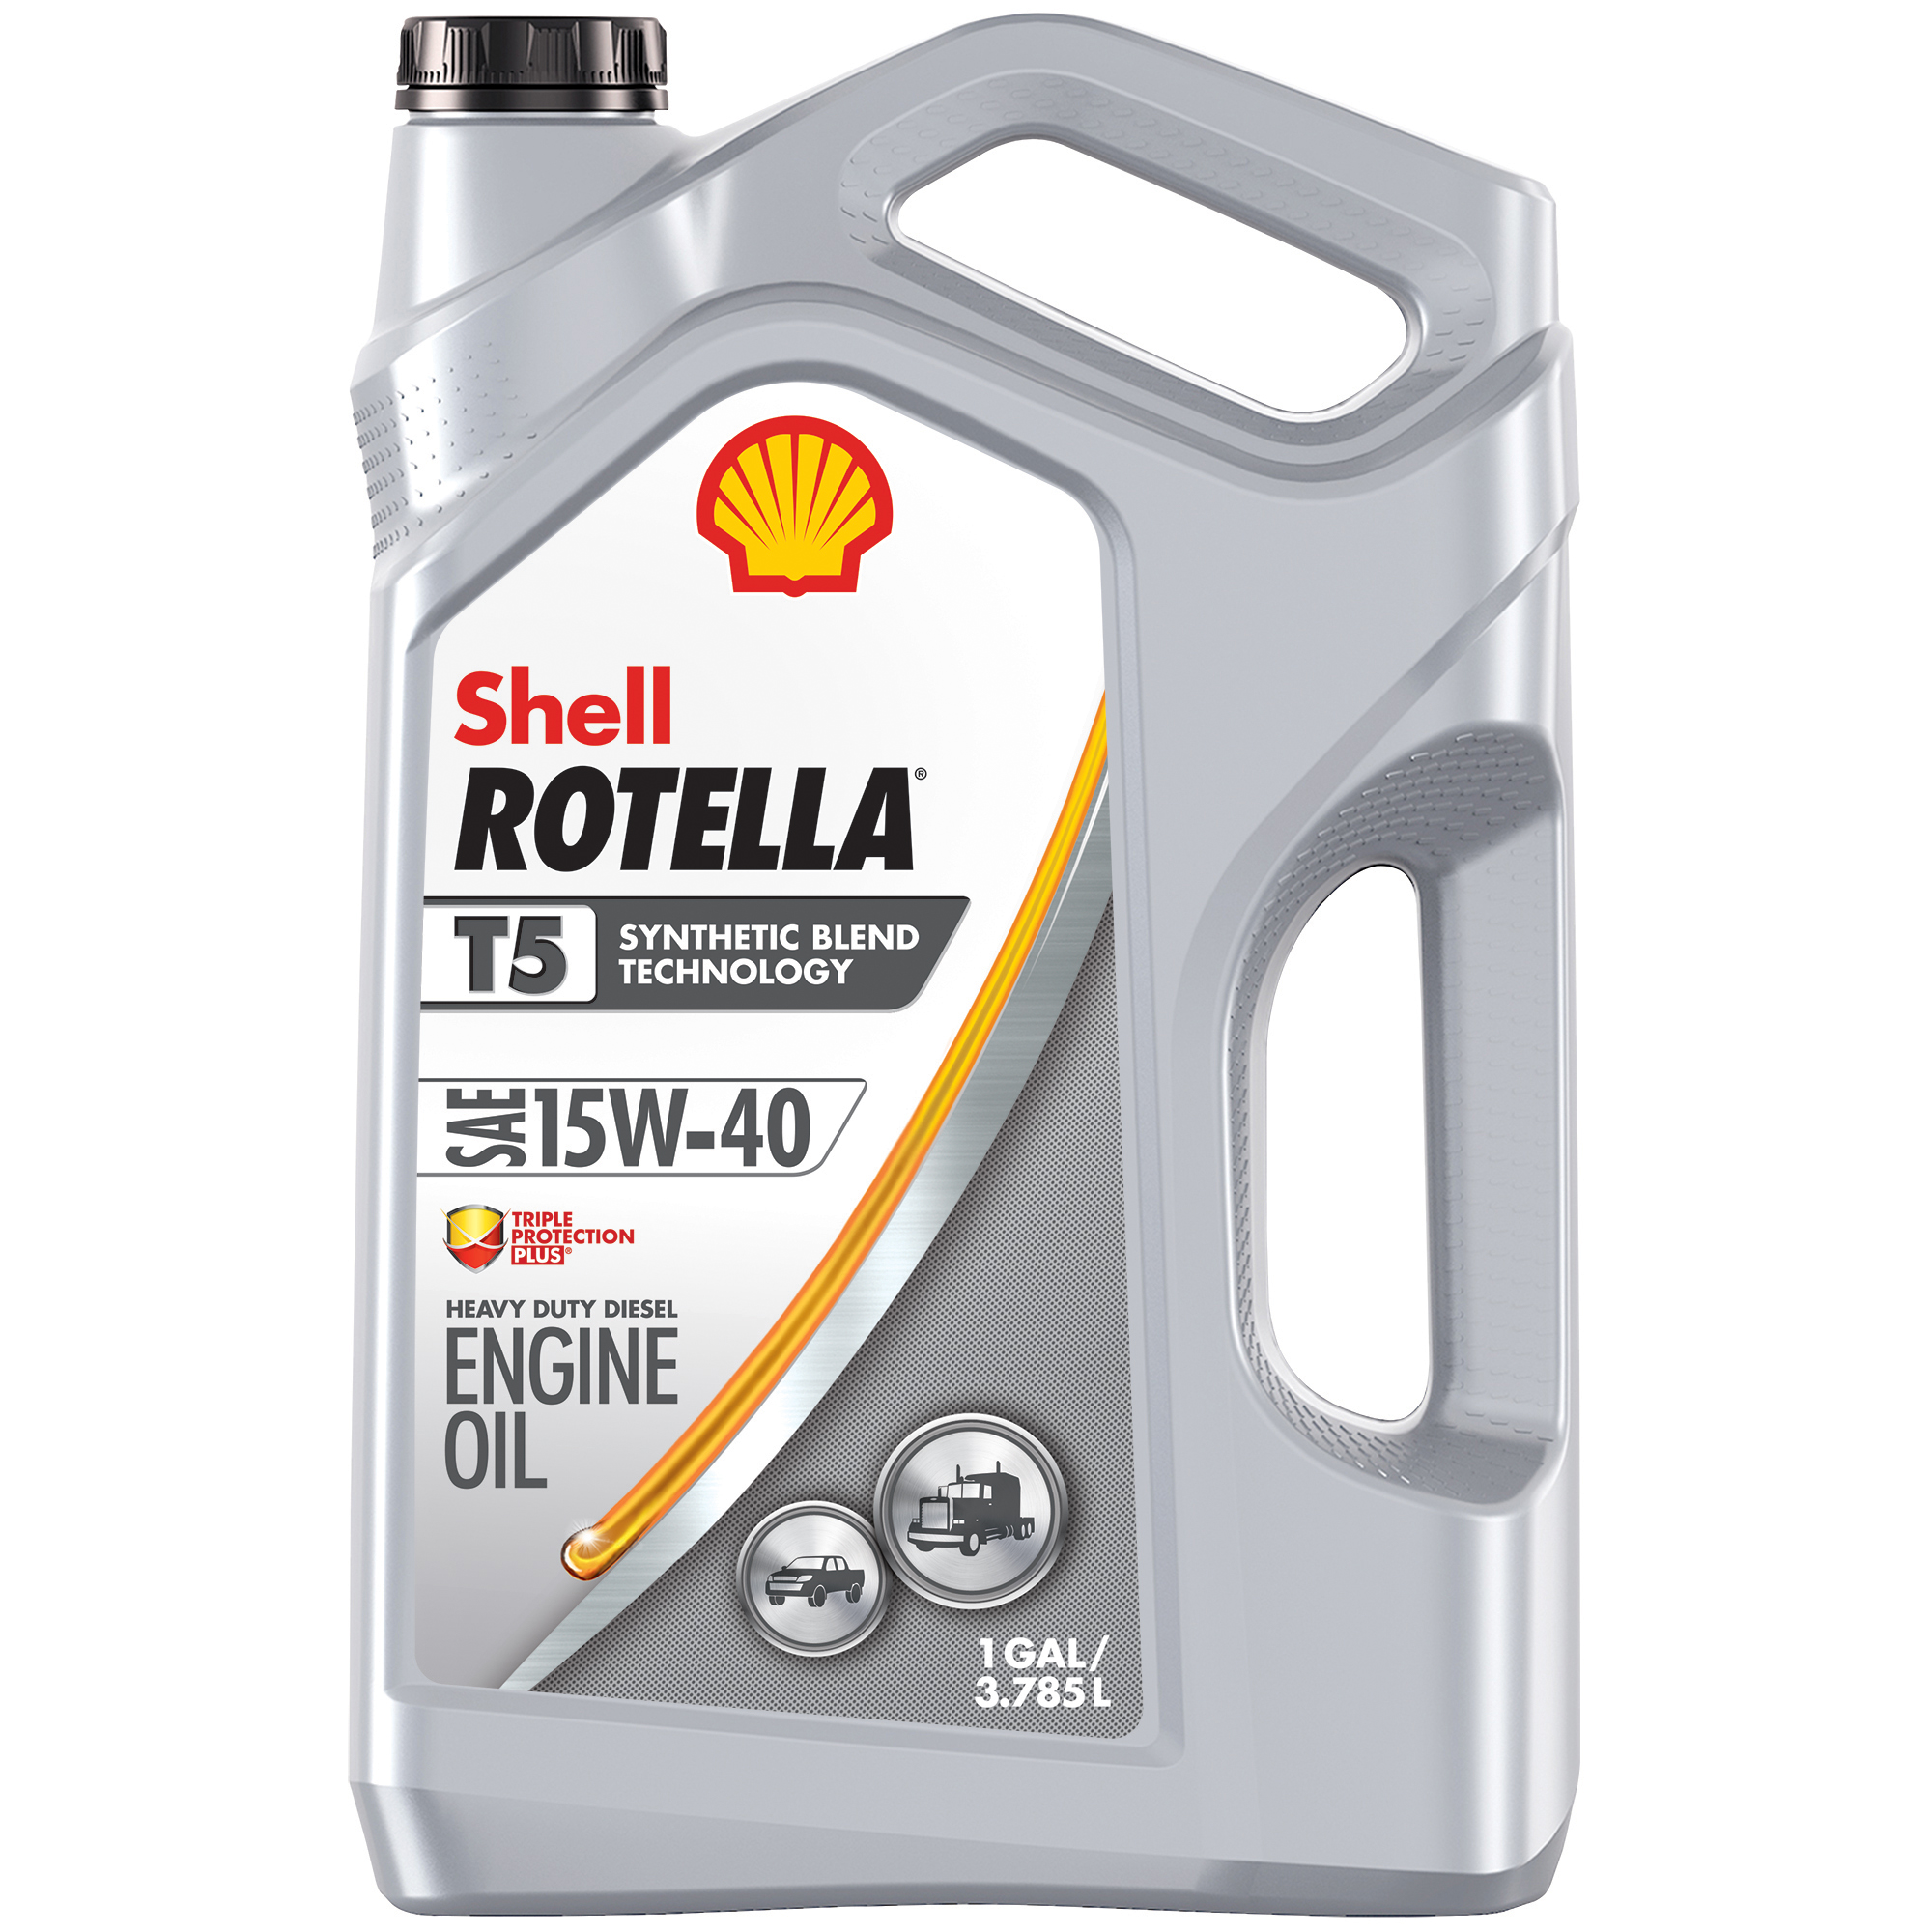 Shell Rotella T5 Synthetic Blend Diesel Engine Oil